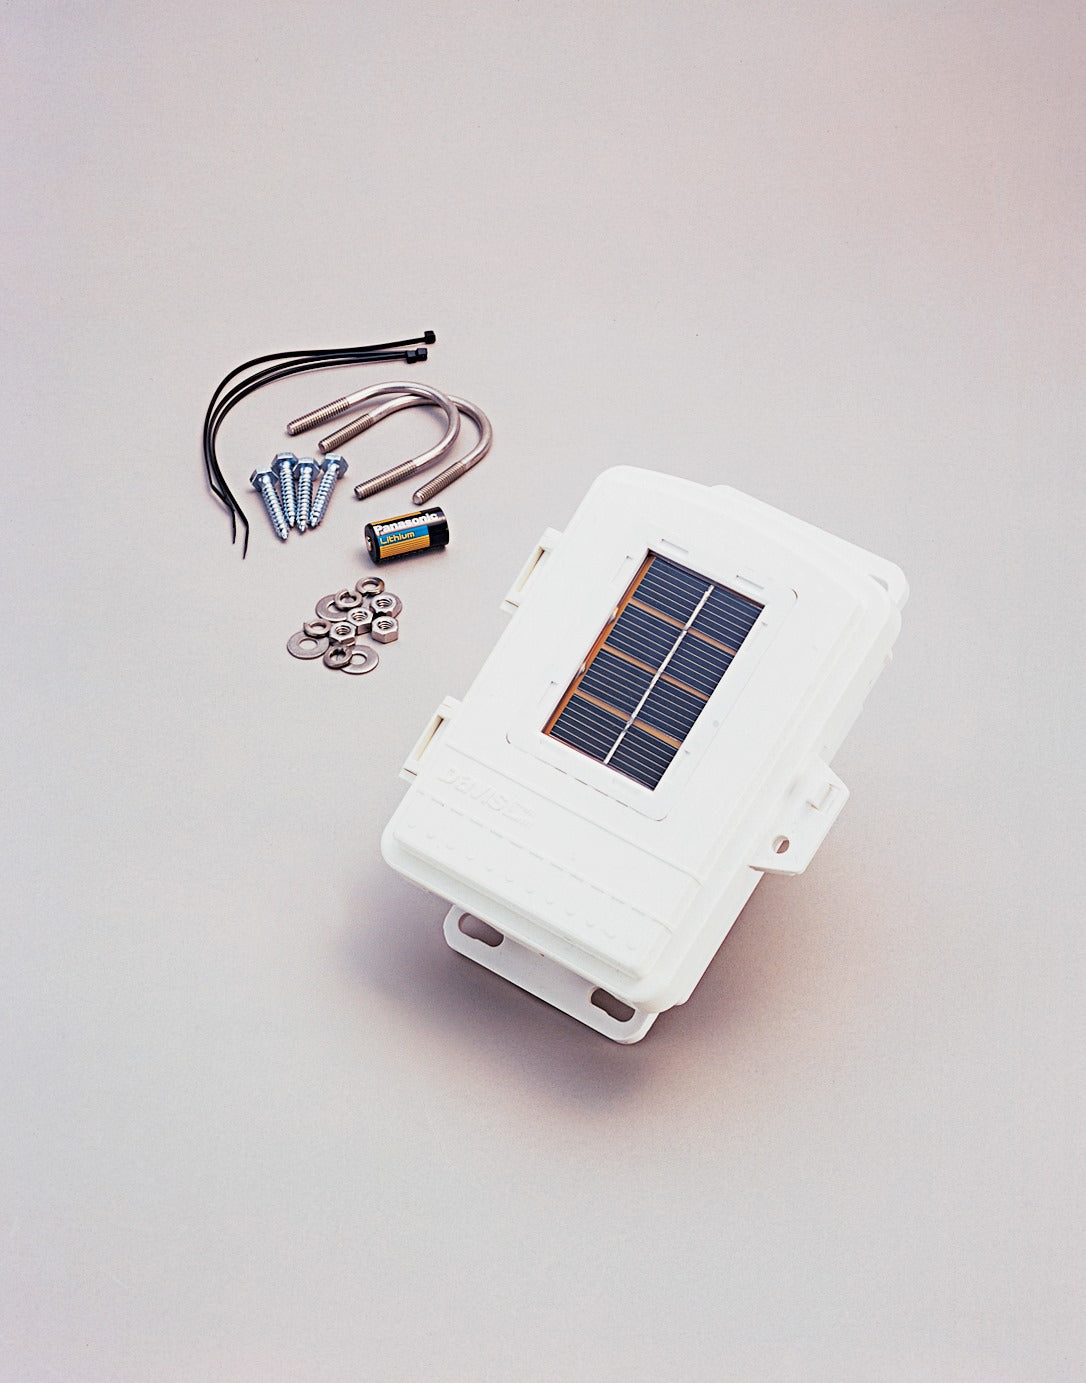 Wireless Long-Range Repeater with Solar Power - SKU 7654